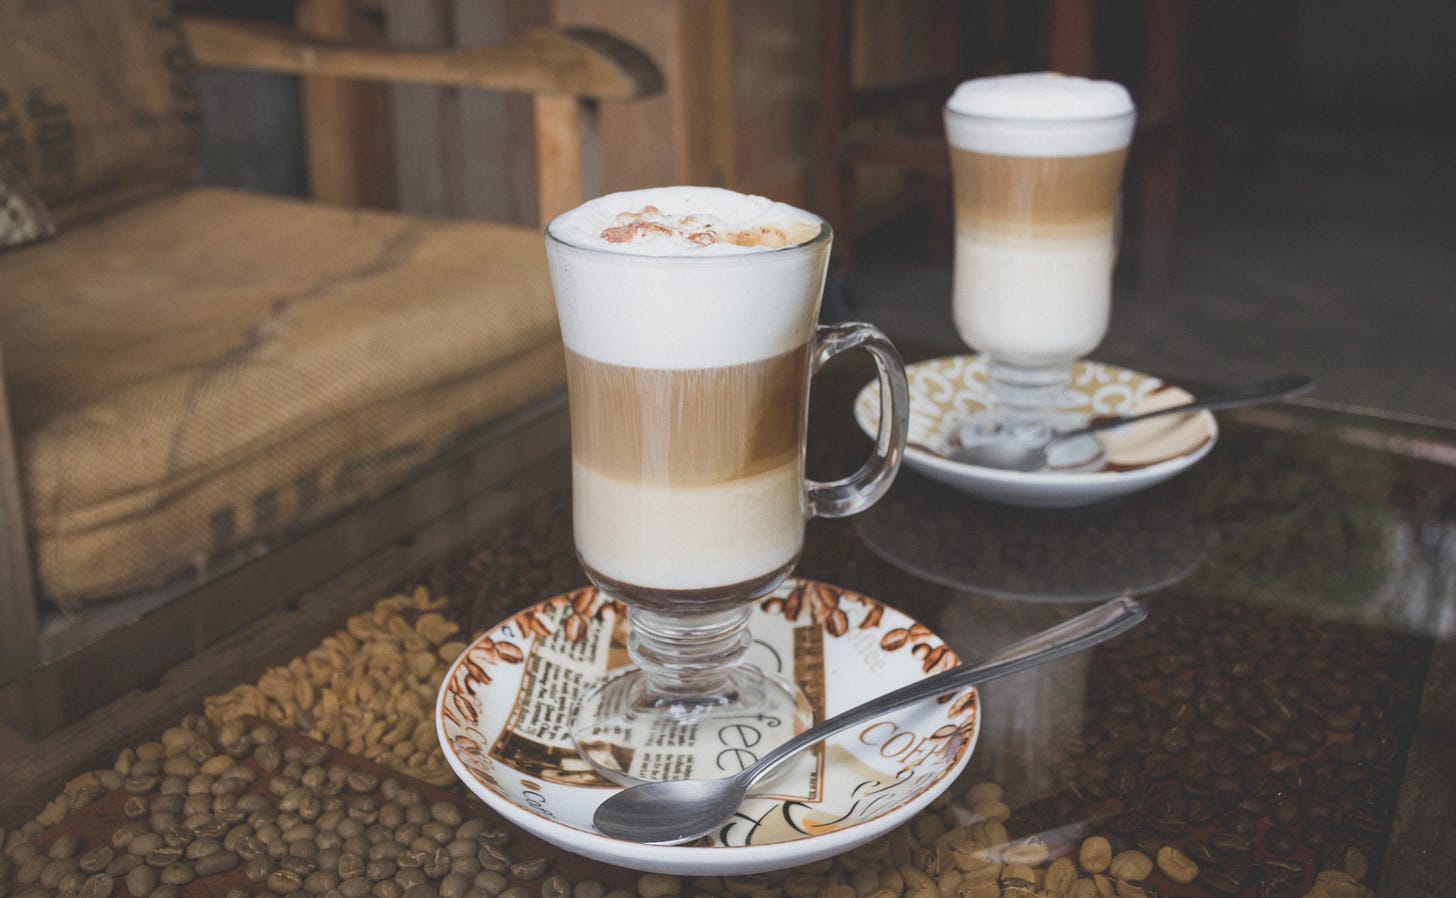 Two tall lattes in clear glasses on a glass coffee table. Coffee beans of various roast colors are underneath the glass and a chair with a coffee burlap sack converted to a chair cushion is in the background.